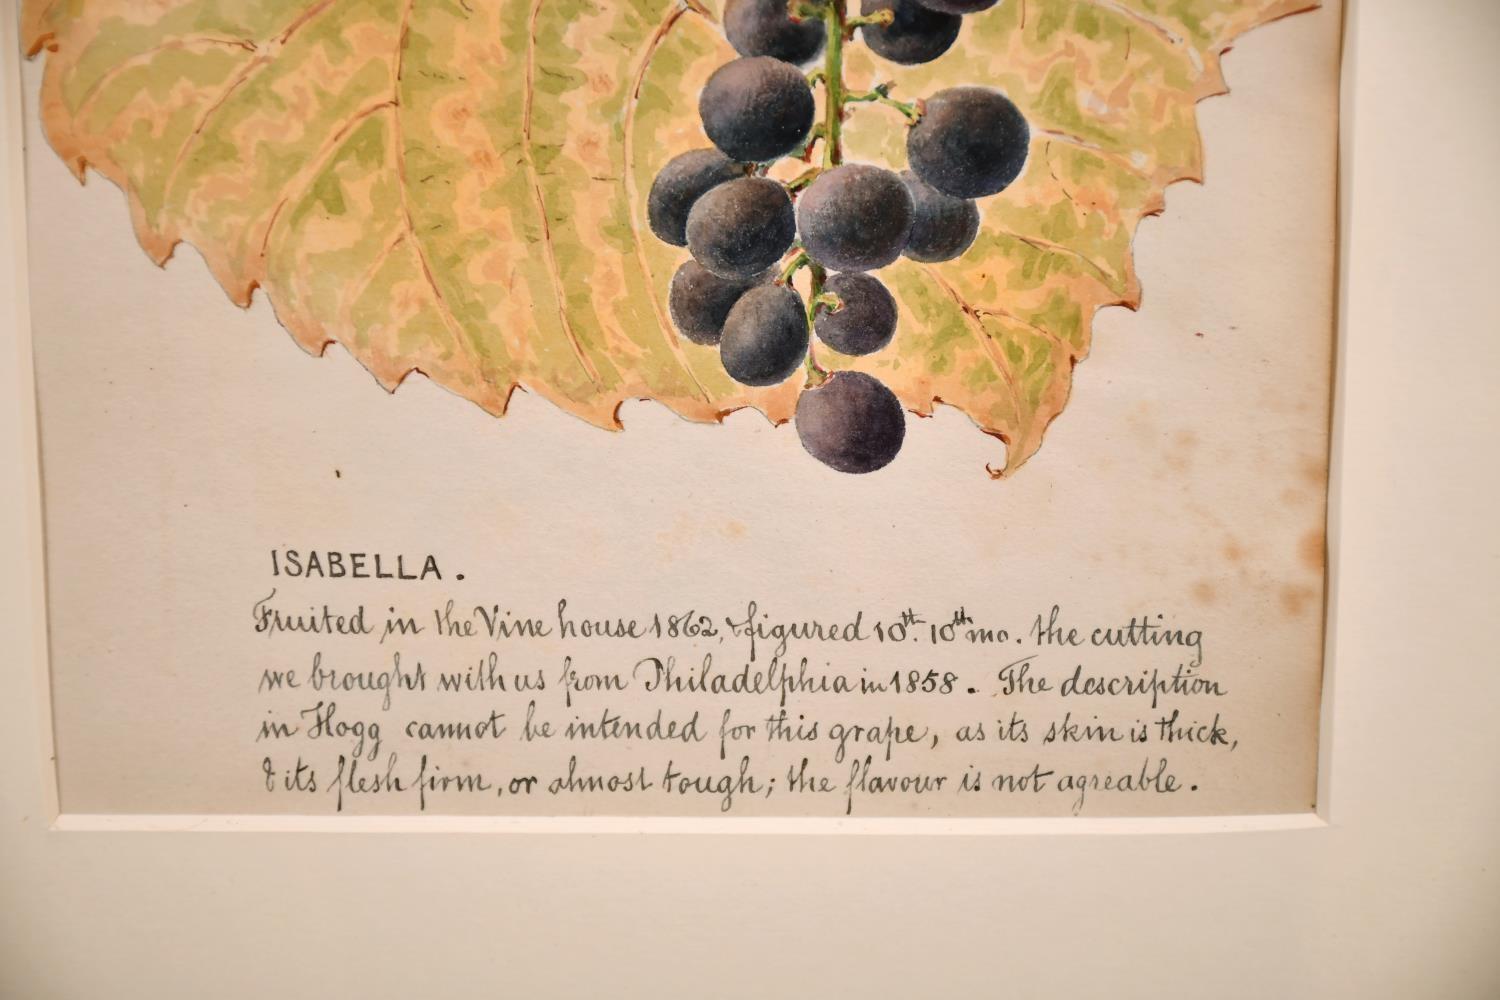 Artist/ School: English/ American School, 19th century, circa 1860's.

Title: Isabella Grapes on the vine. Interesting inscription telling the history of the drawing and how the original cutting was taken in Philadelphia, USA.

Medium: